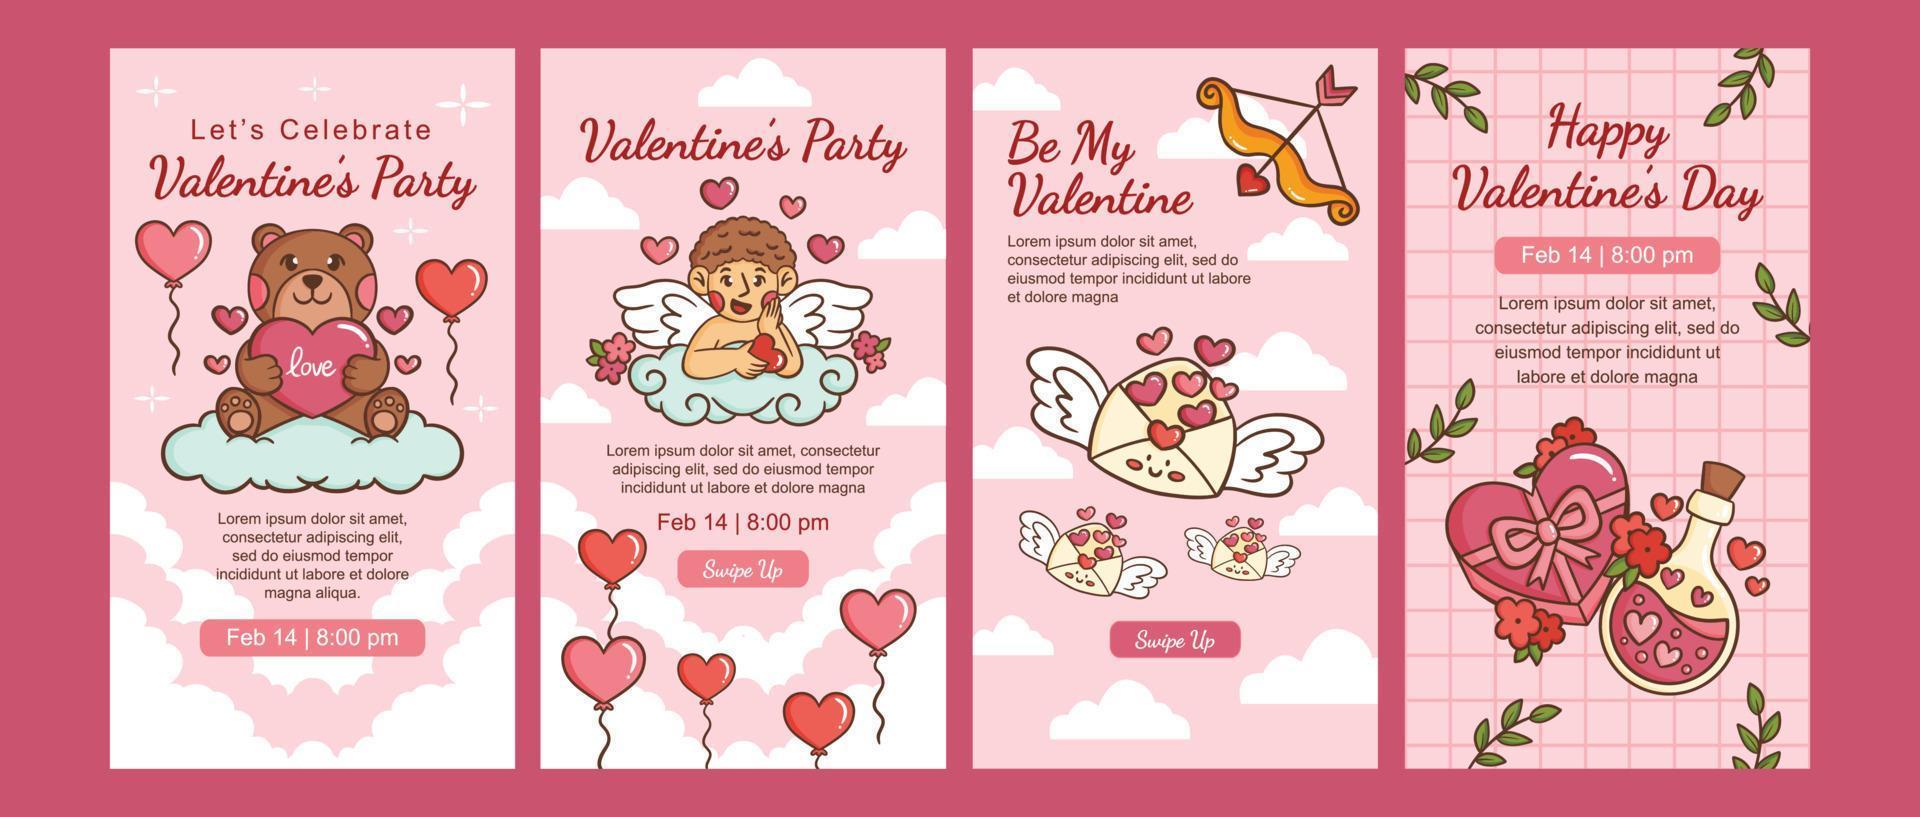 Valentines day party instagram stories social media portrait with hand drawn illustration set include bear, love, cupid, message heart, potion and chocolate cake template design vector